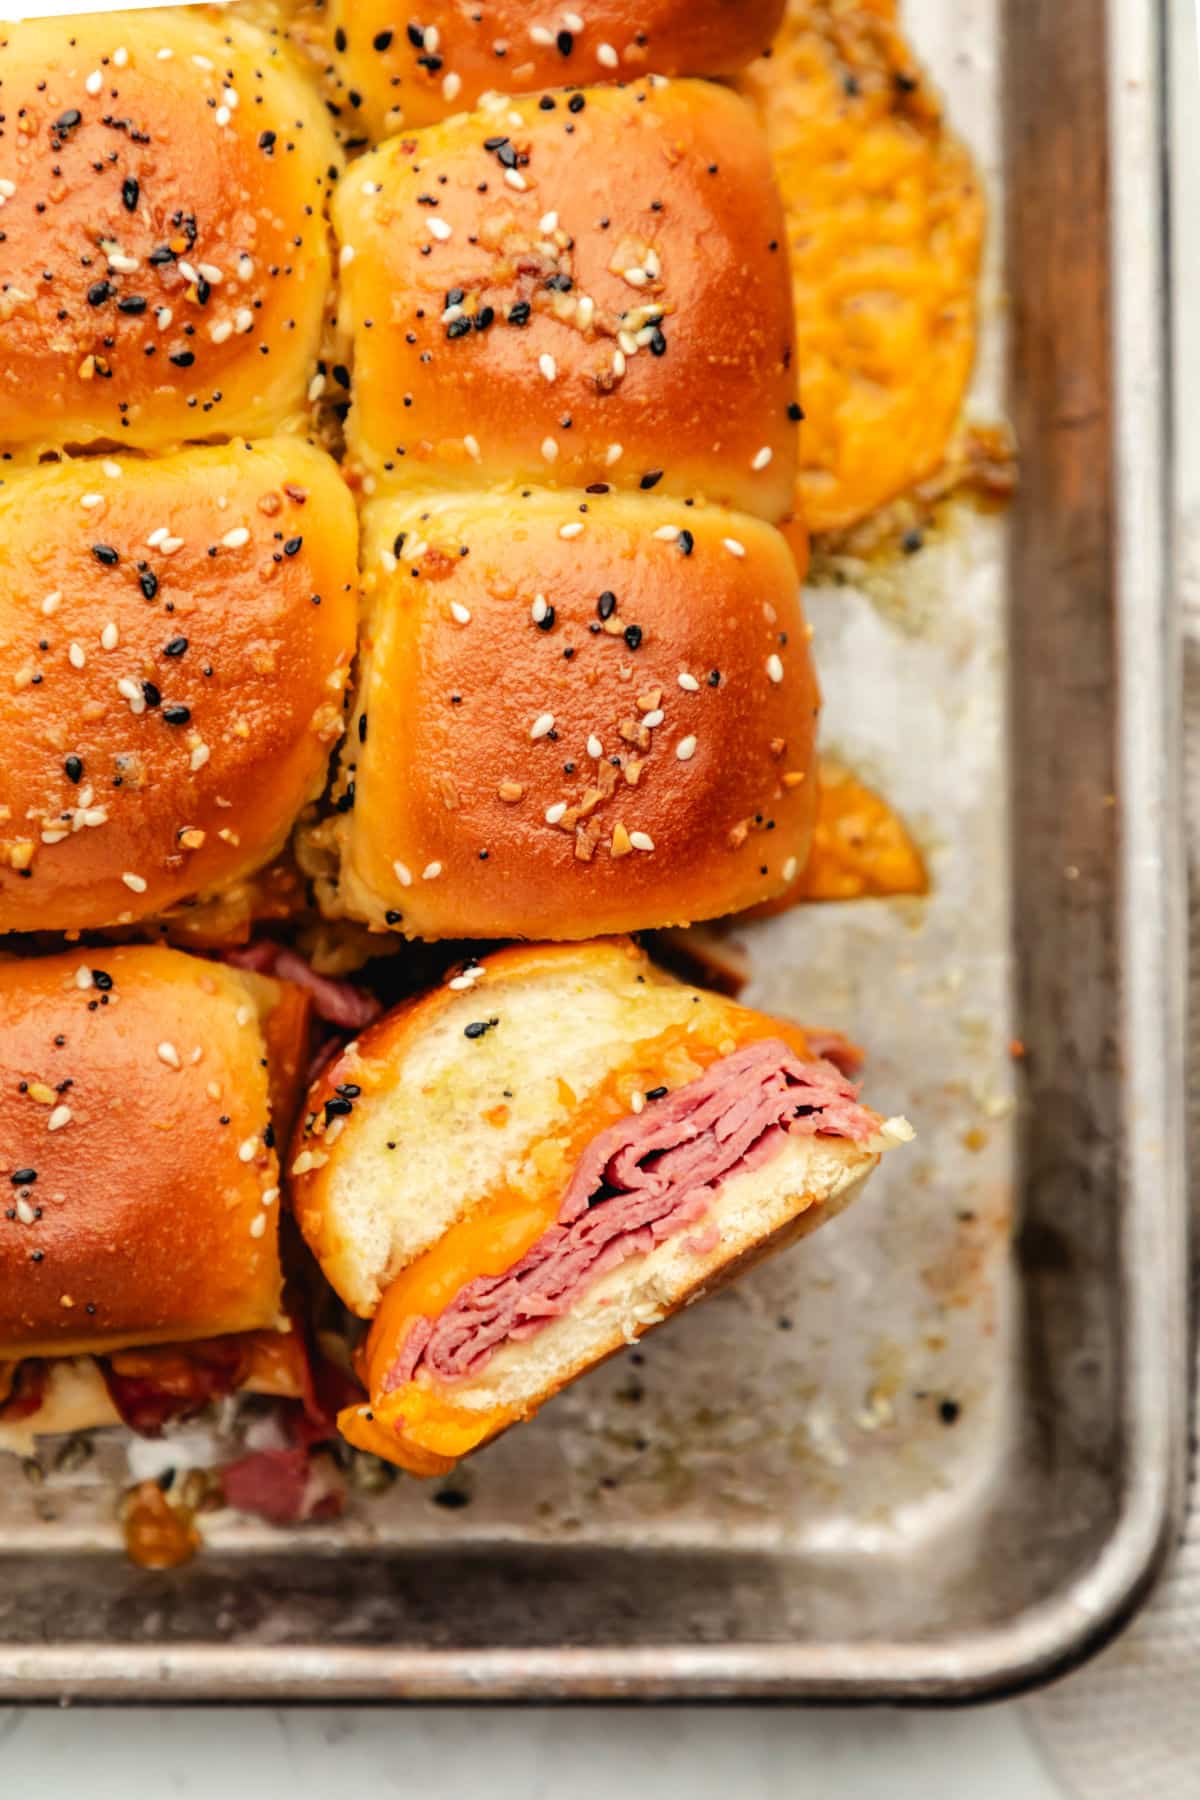 A baked roast beef slider on its side in a pan of baked sliders.